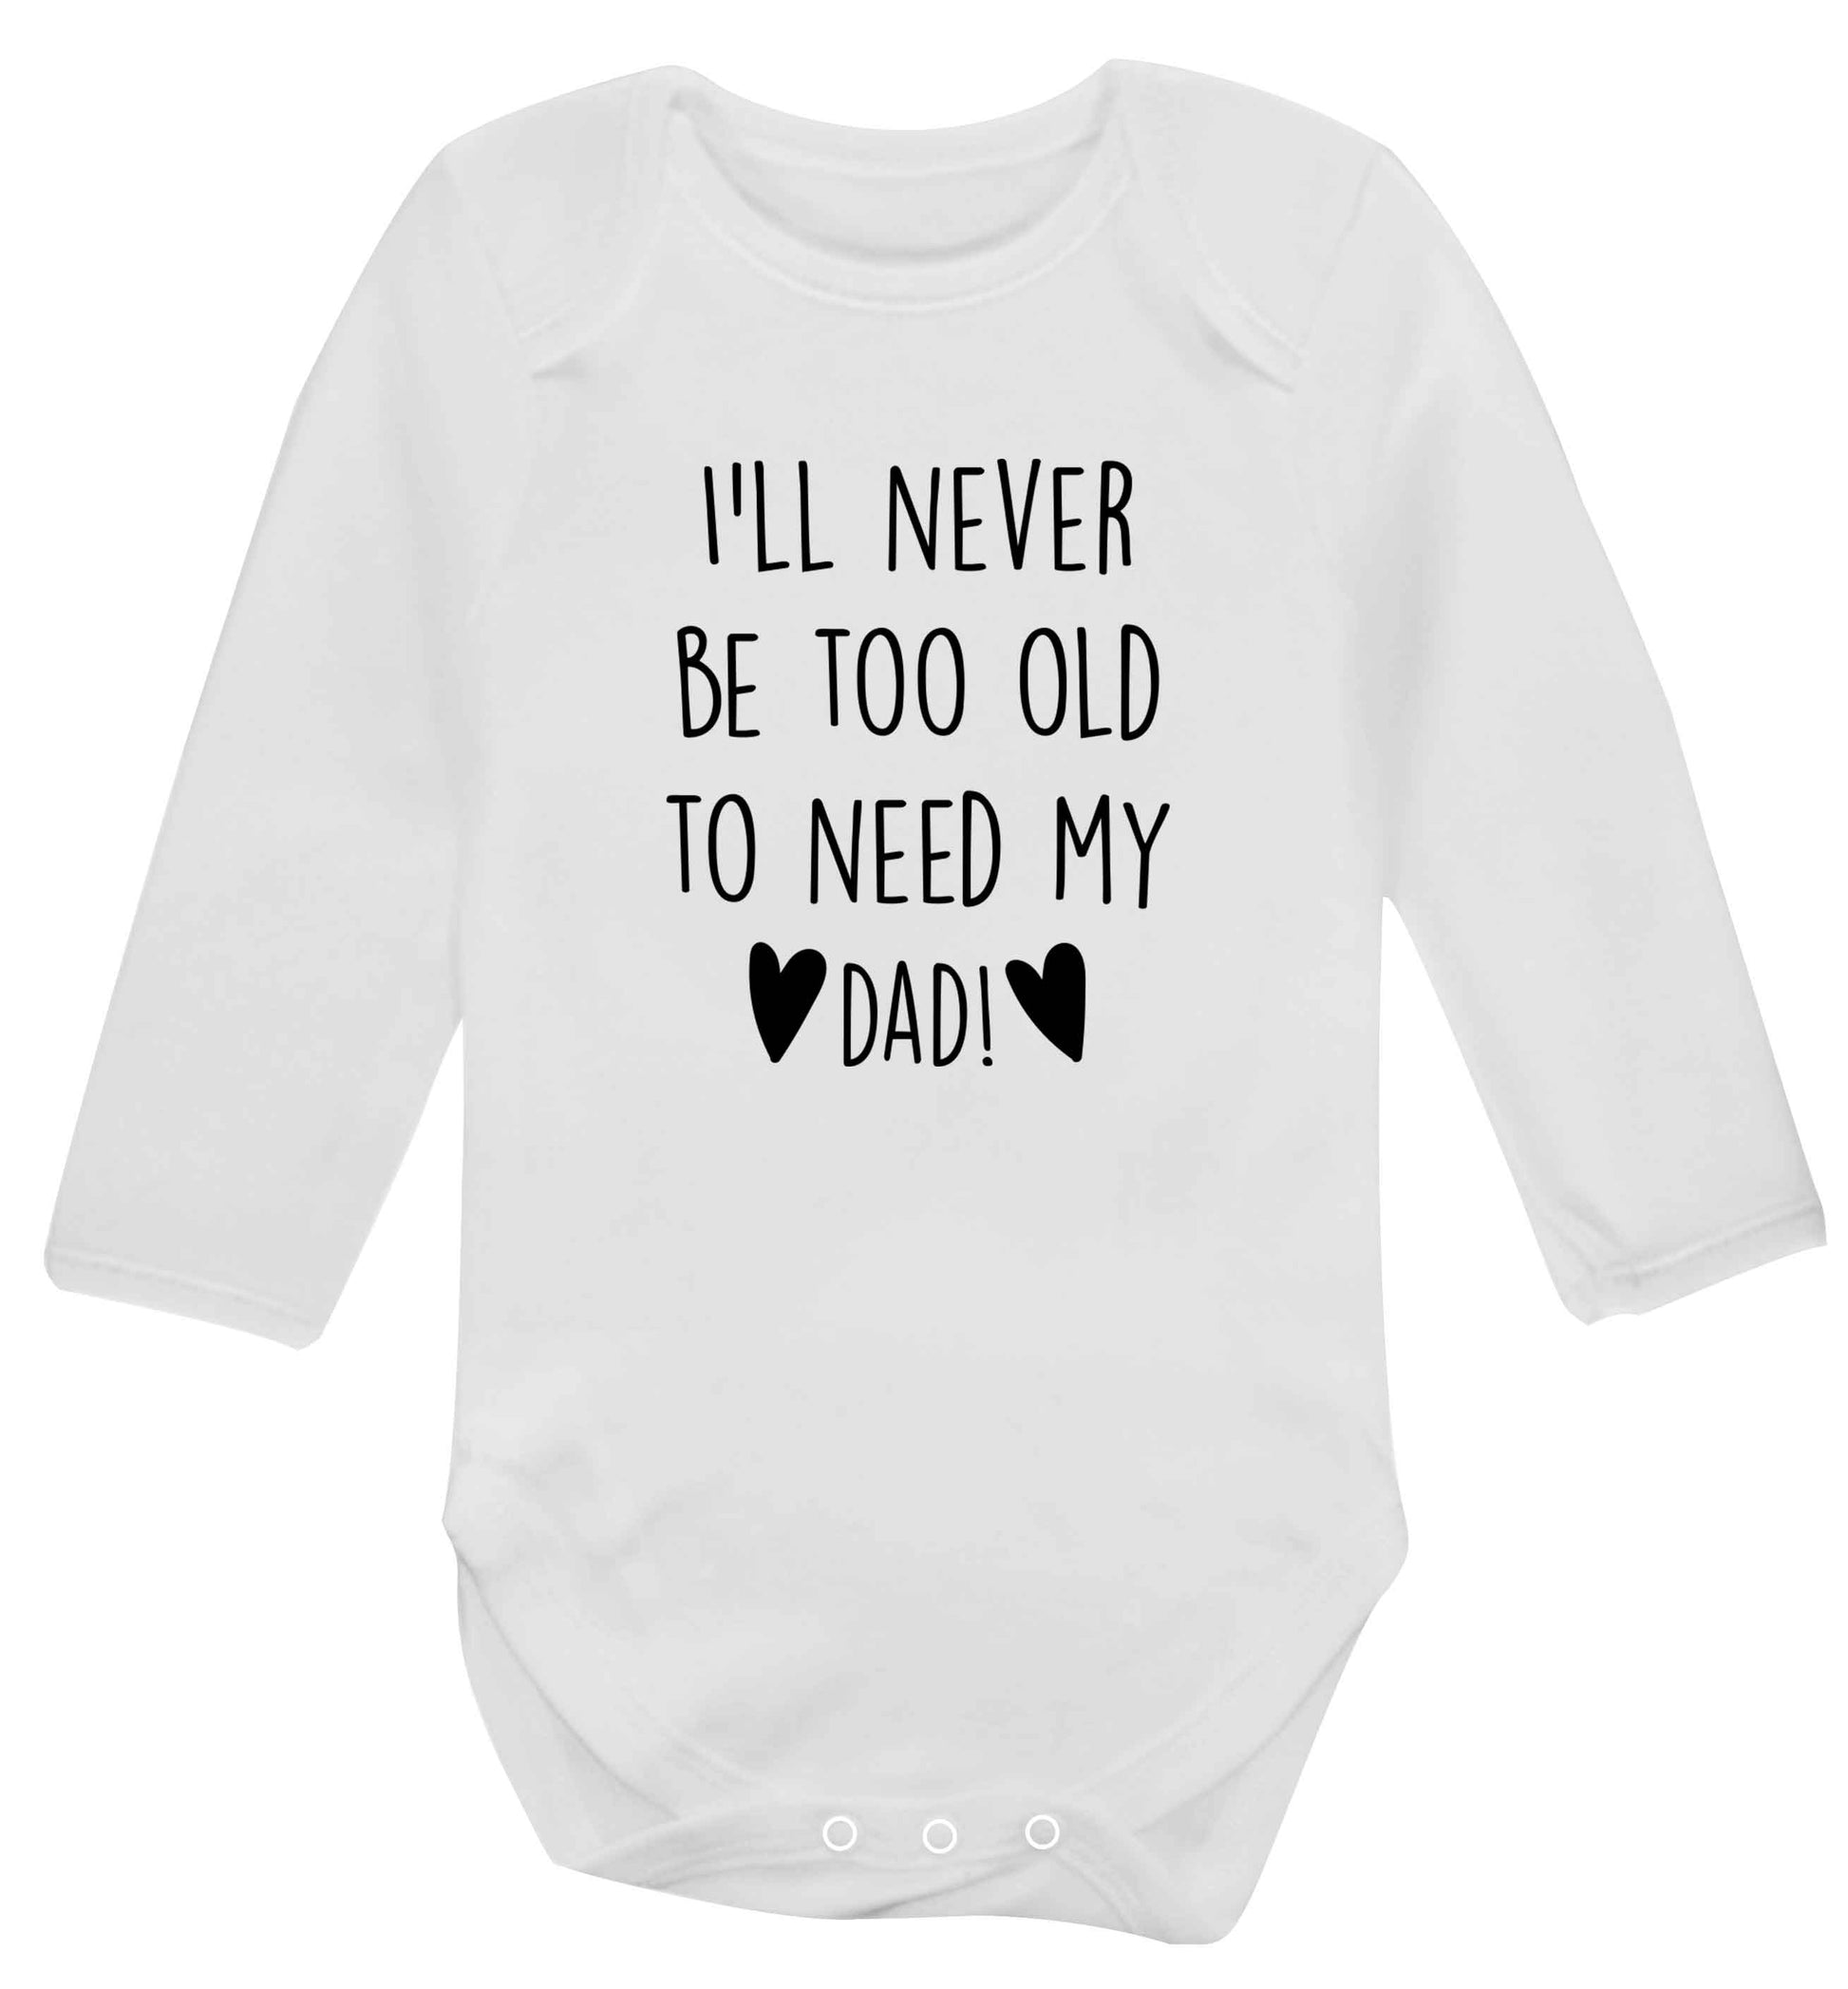 I'll never be too old to need my dad baby vest long sleeved white 6-12 months